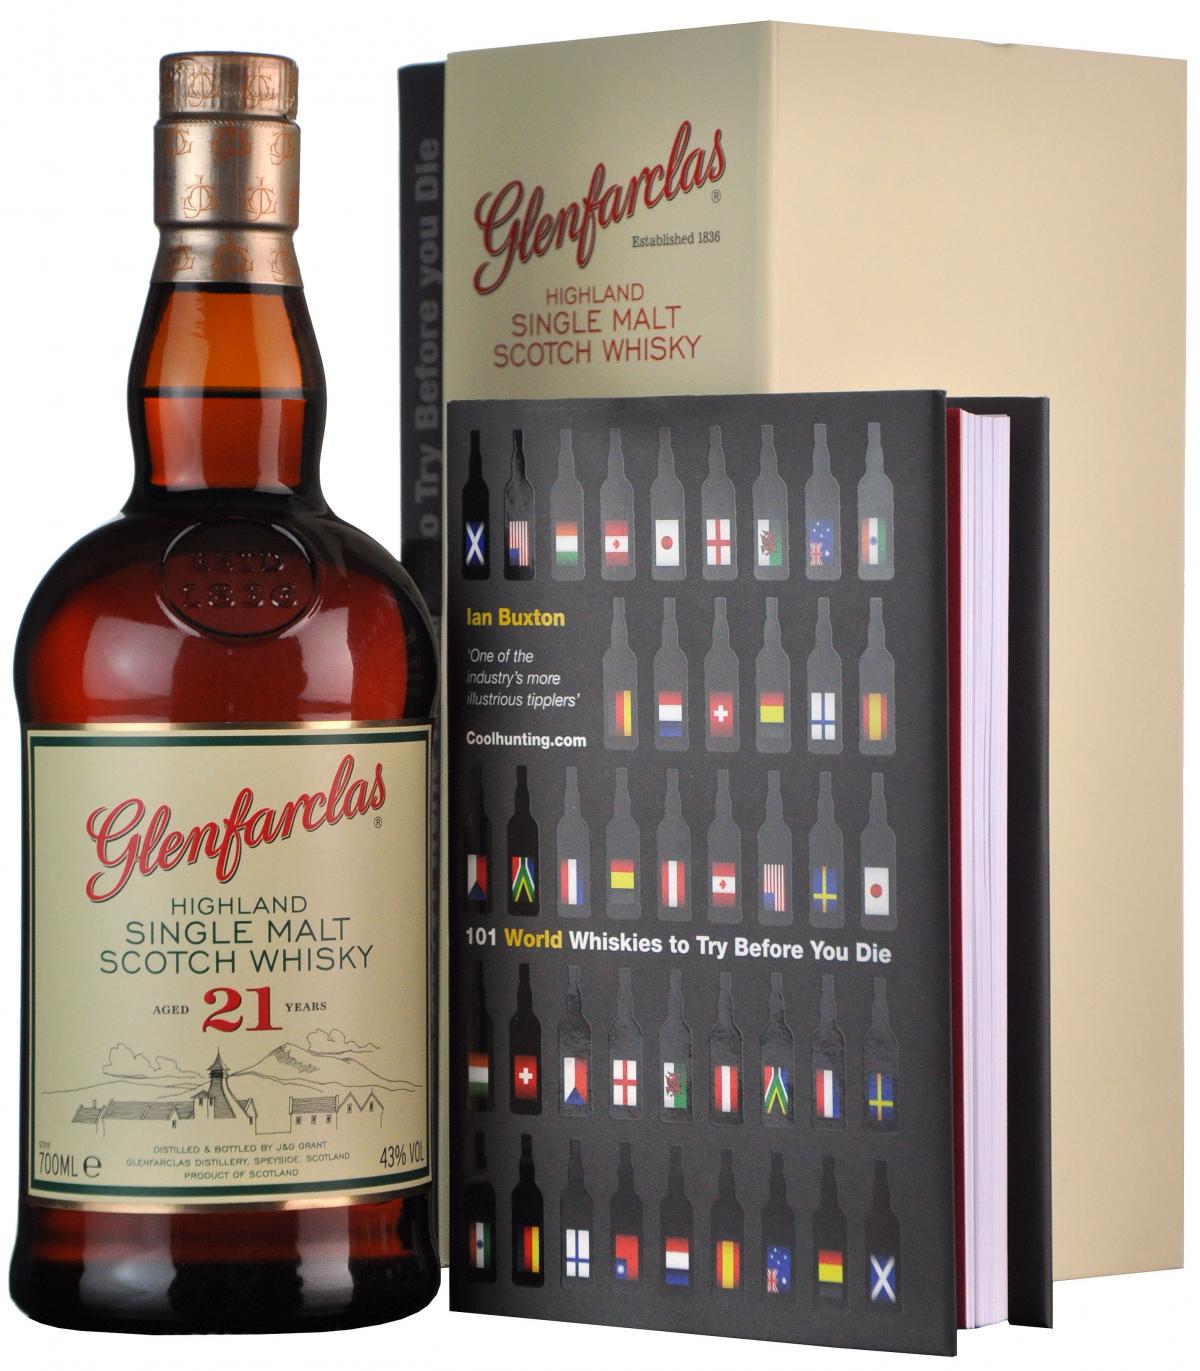 glenfarclas 21 year old + 101 world whiskies to try before you die, gift pack speyside single malt scotch whisky